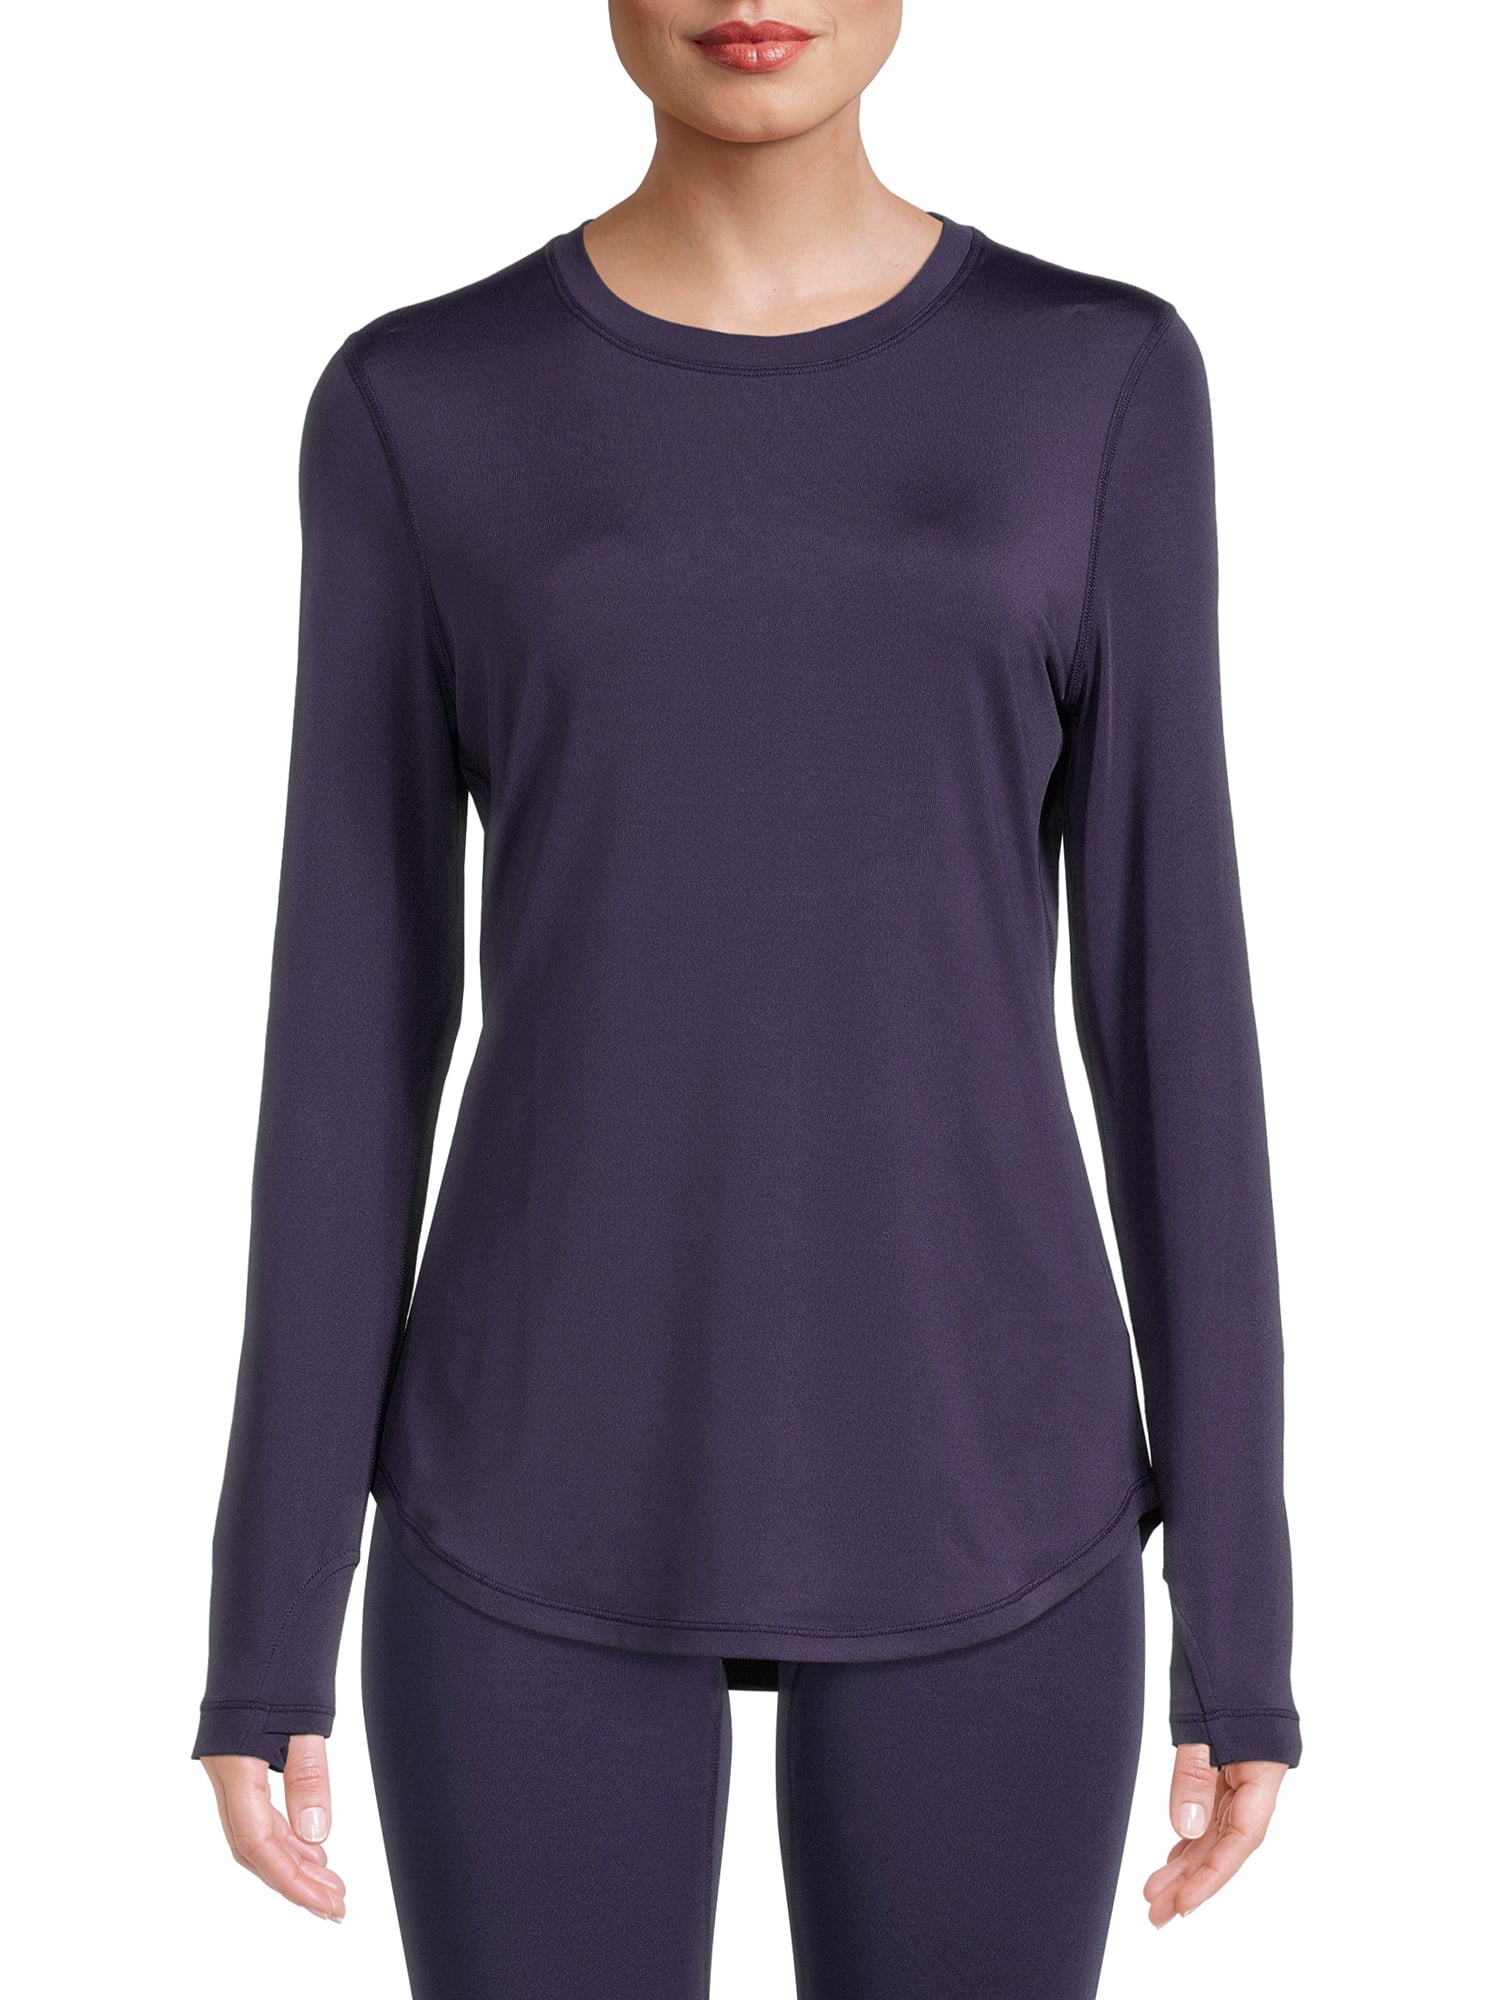 ClimateRight by Cuddl Duds Long Sleeve Crew Neck Base Layer Top (Women's),  1 Count, 1 Pack 